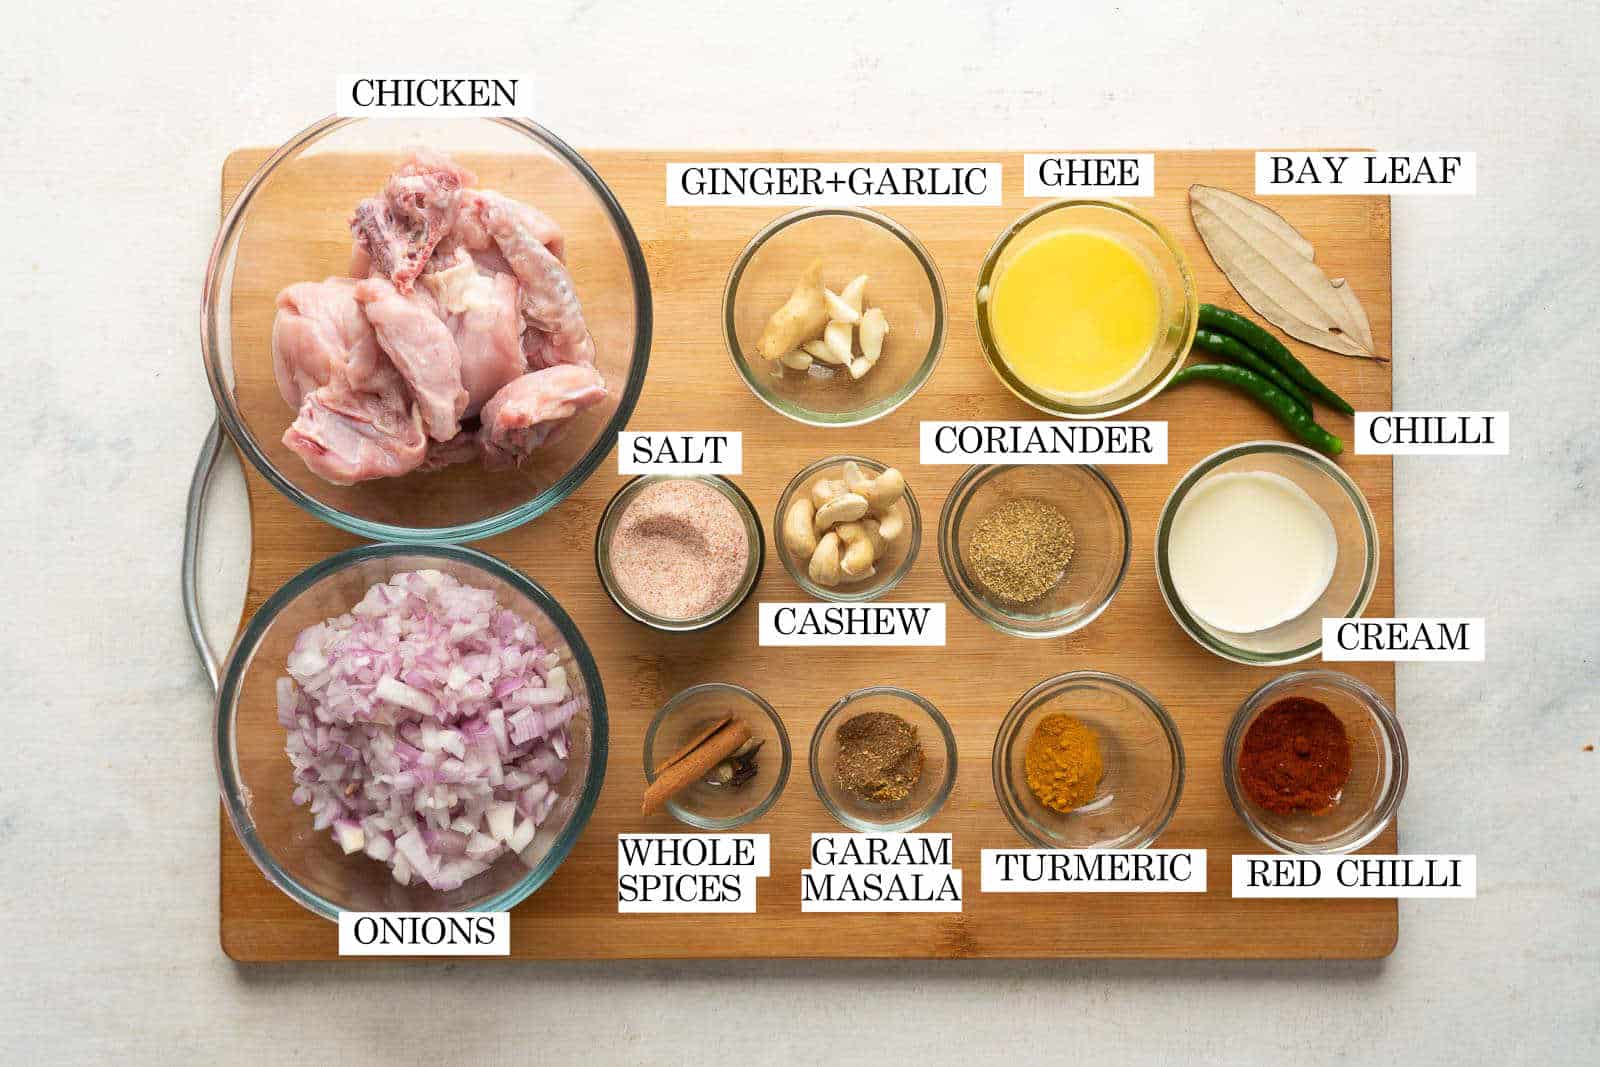 Ingredients for Mughlai Chicken laid out on a tabletop with text to identify each ingredient